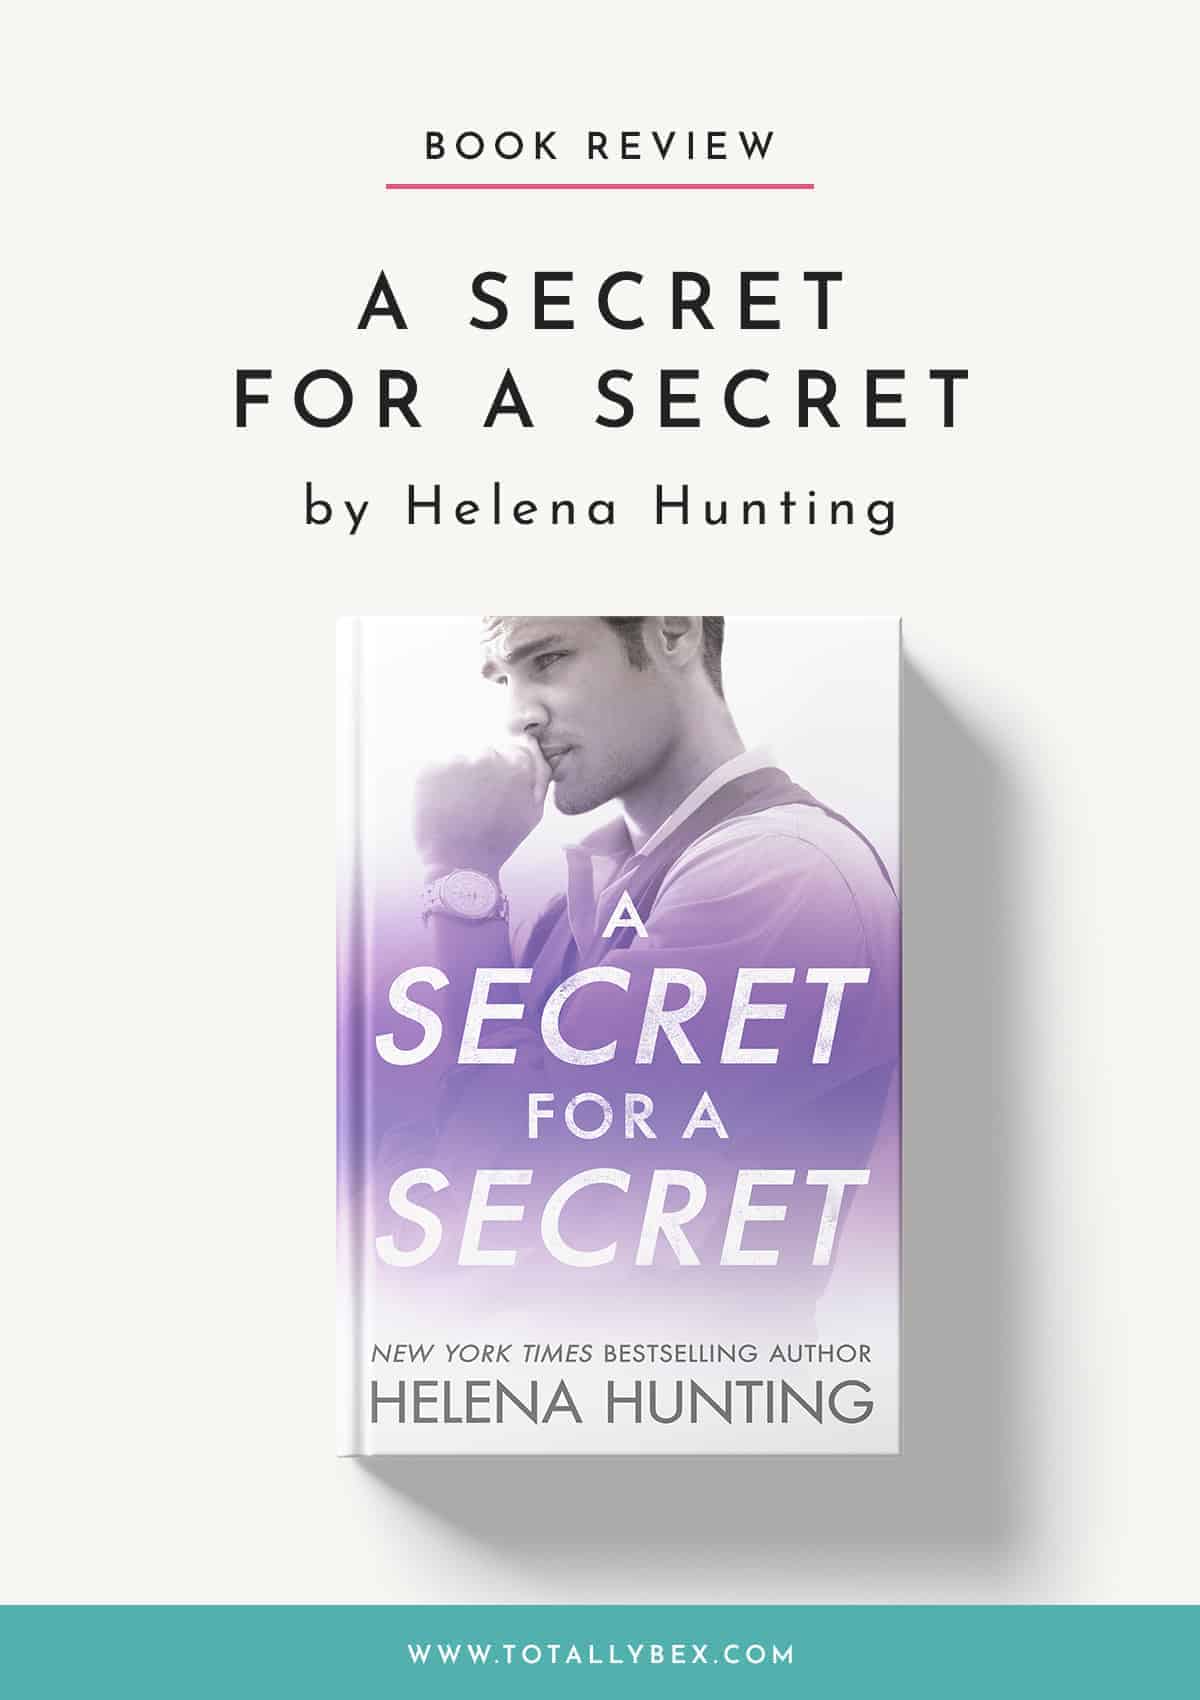 A Secret for a Secret by Helena Hunting-Book Review